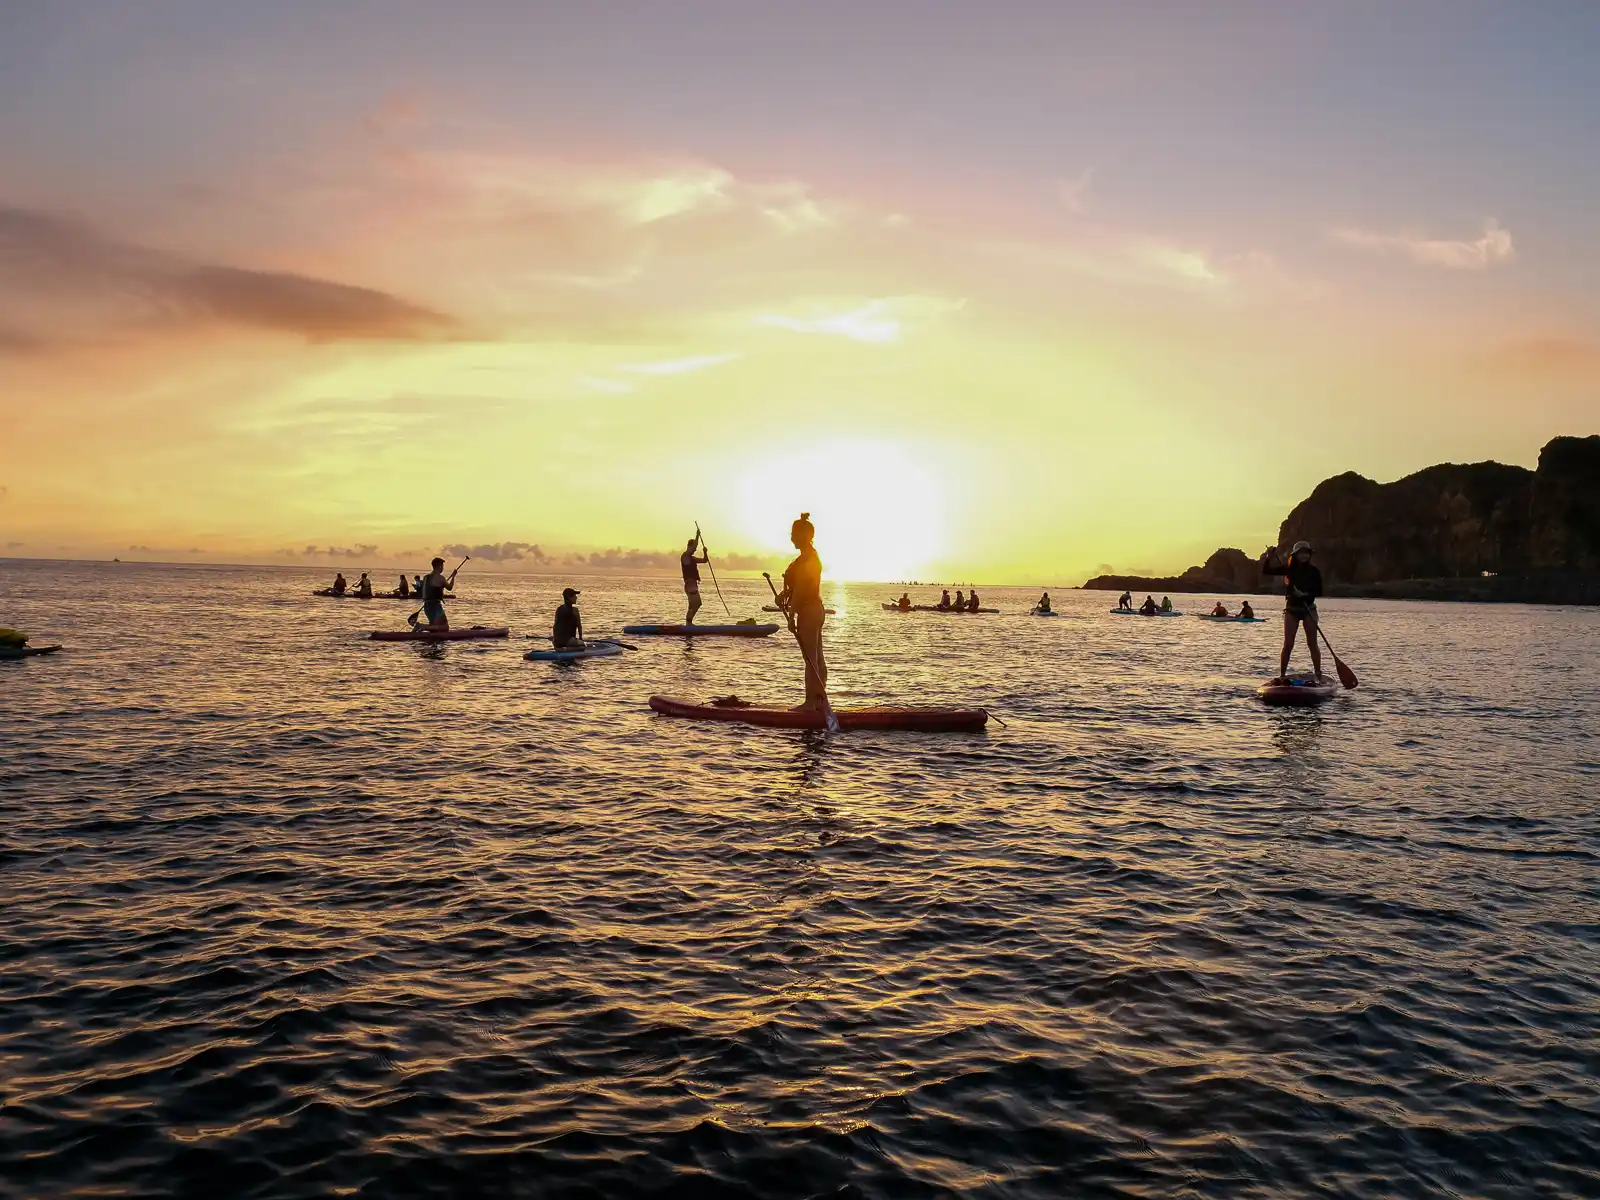 Several paddlers stand up on their paddleboards.